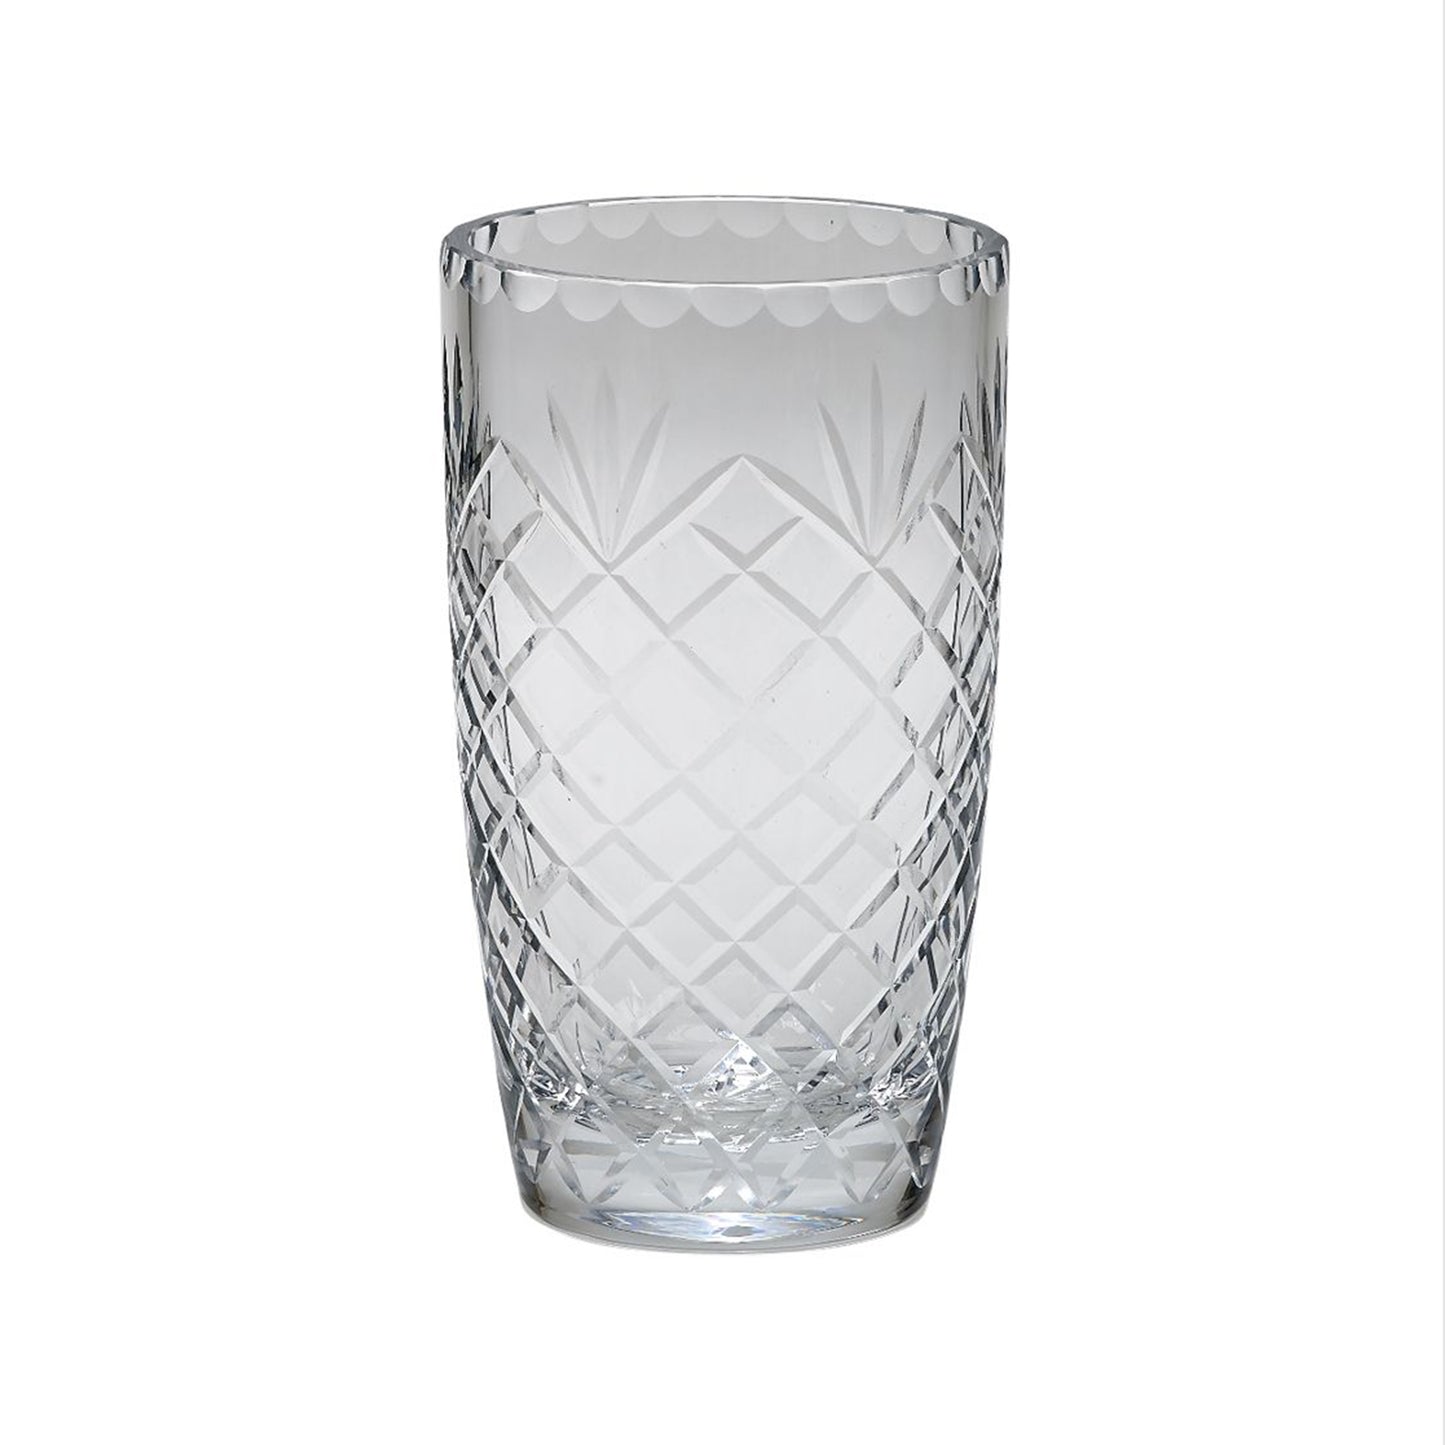 Optic Crystal Vase With Medallion Ll Pattern, 7.75"